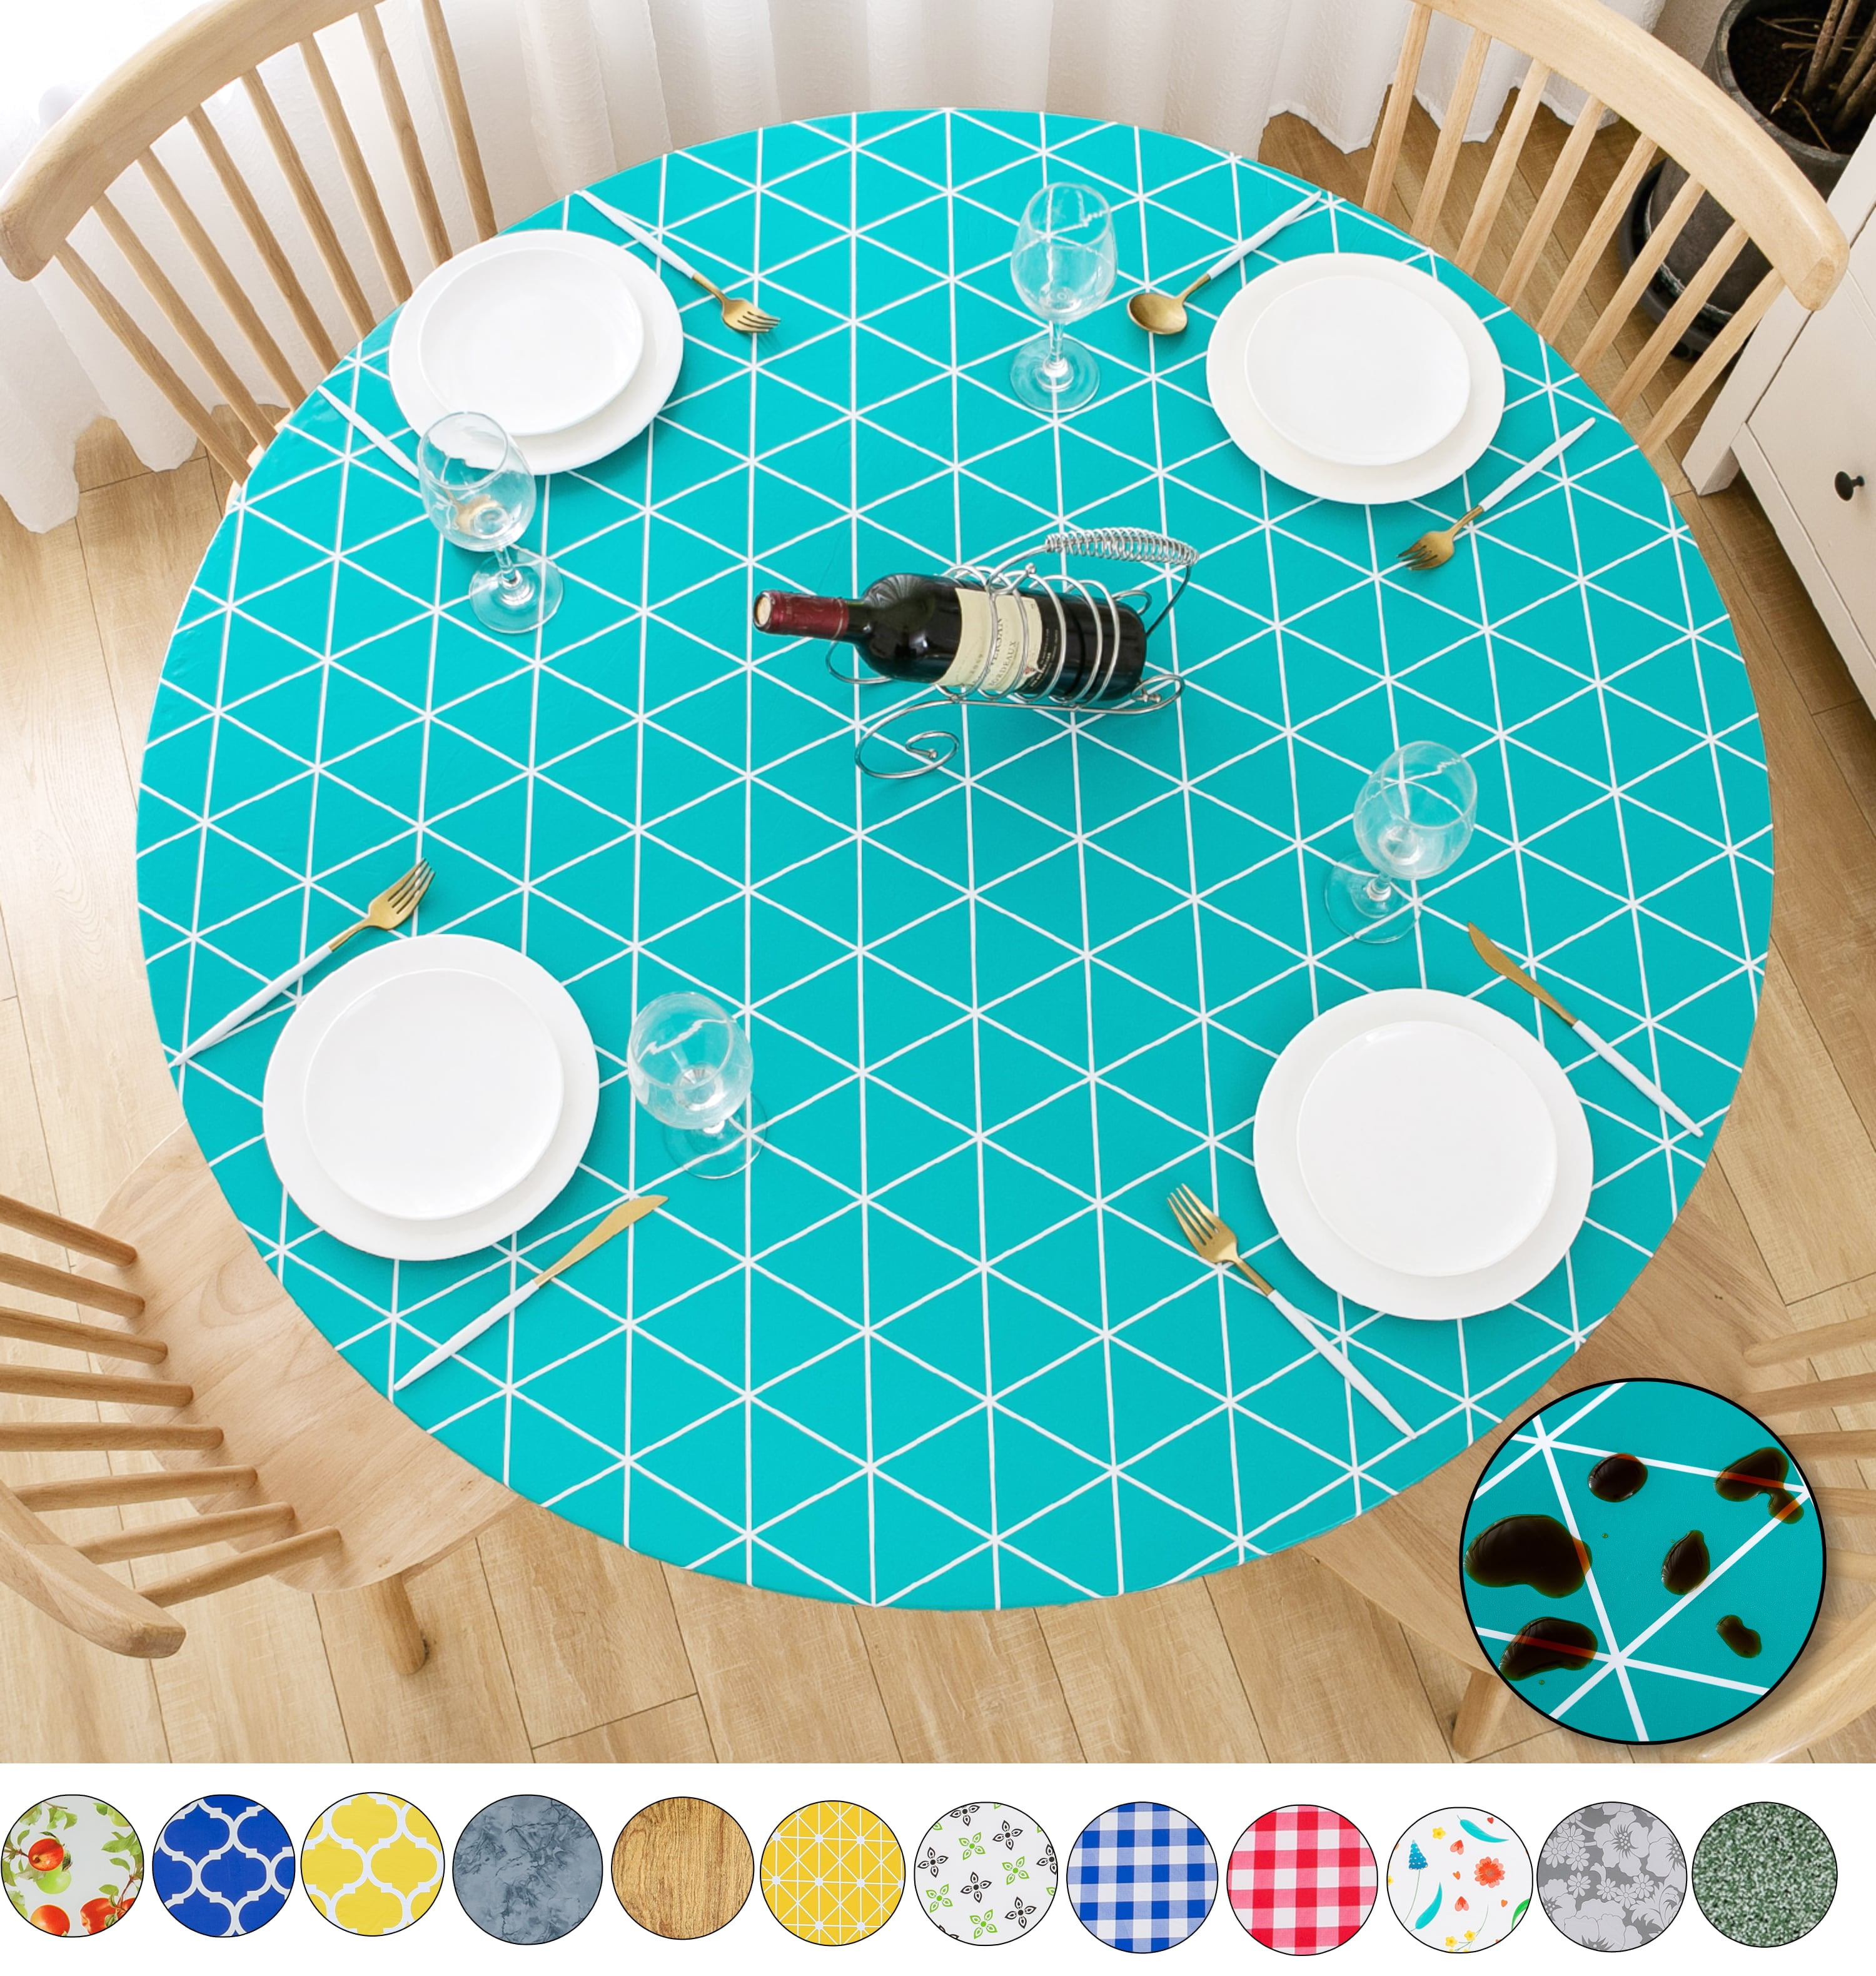 Patio Fenteer Indoor Outdoor Patio Round Fitted Vinyl Tablecloth Flannel Backing gray L Parties Spill Proof Wipeable Plastic Cover for Dining Table Elastic Edge